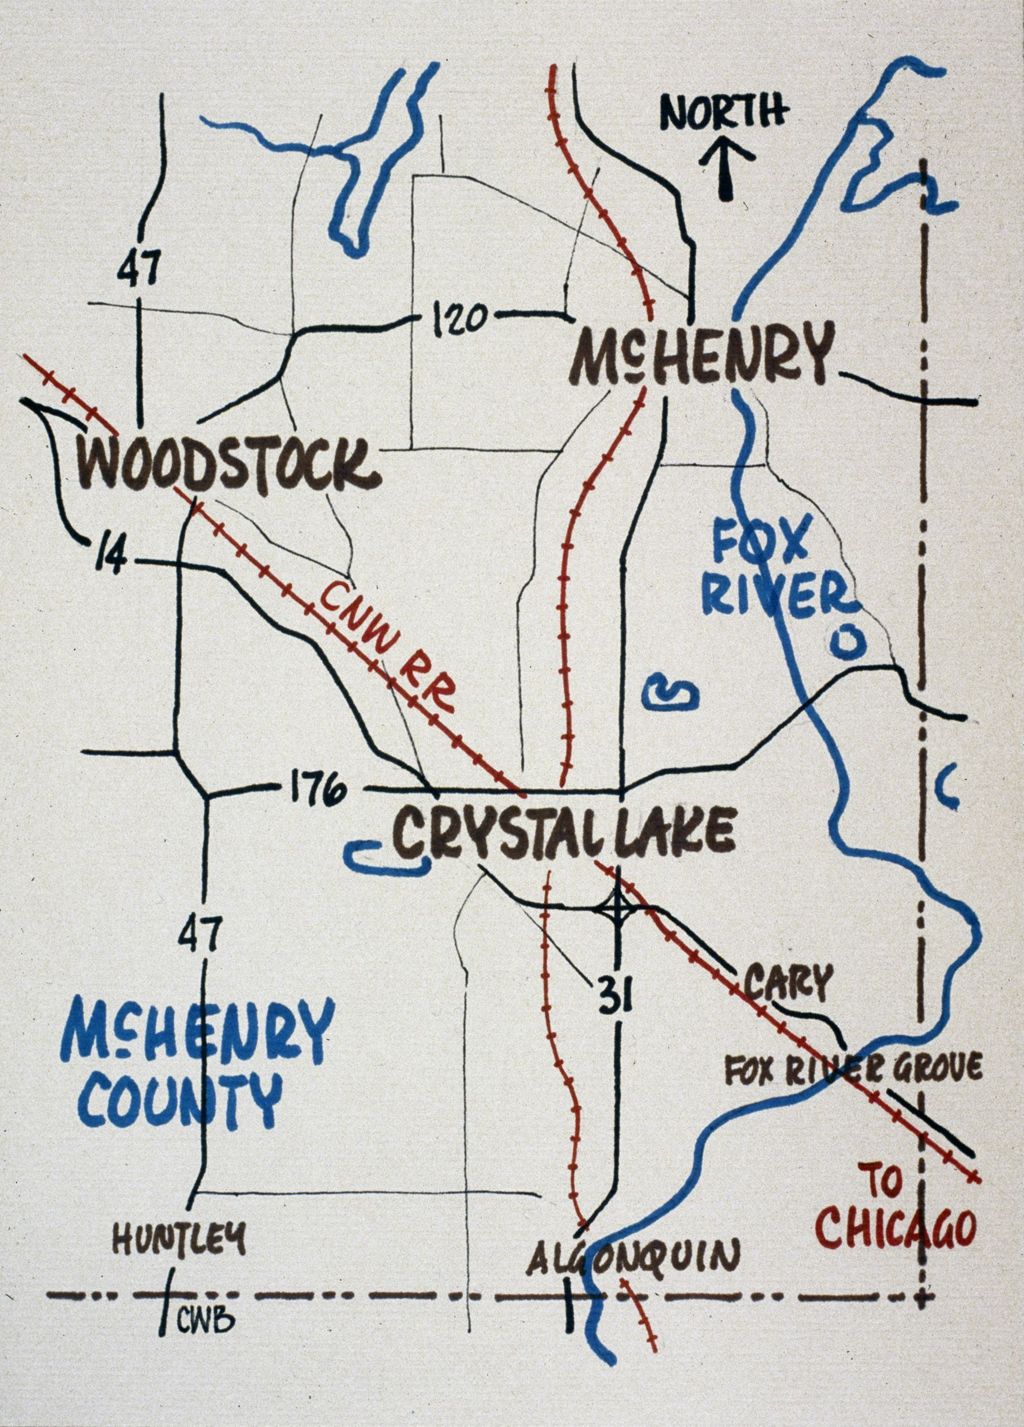 Miniature of McHenry County, Illinois